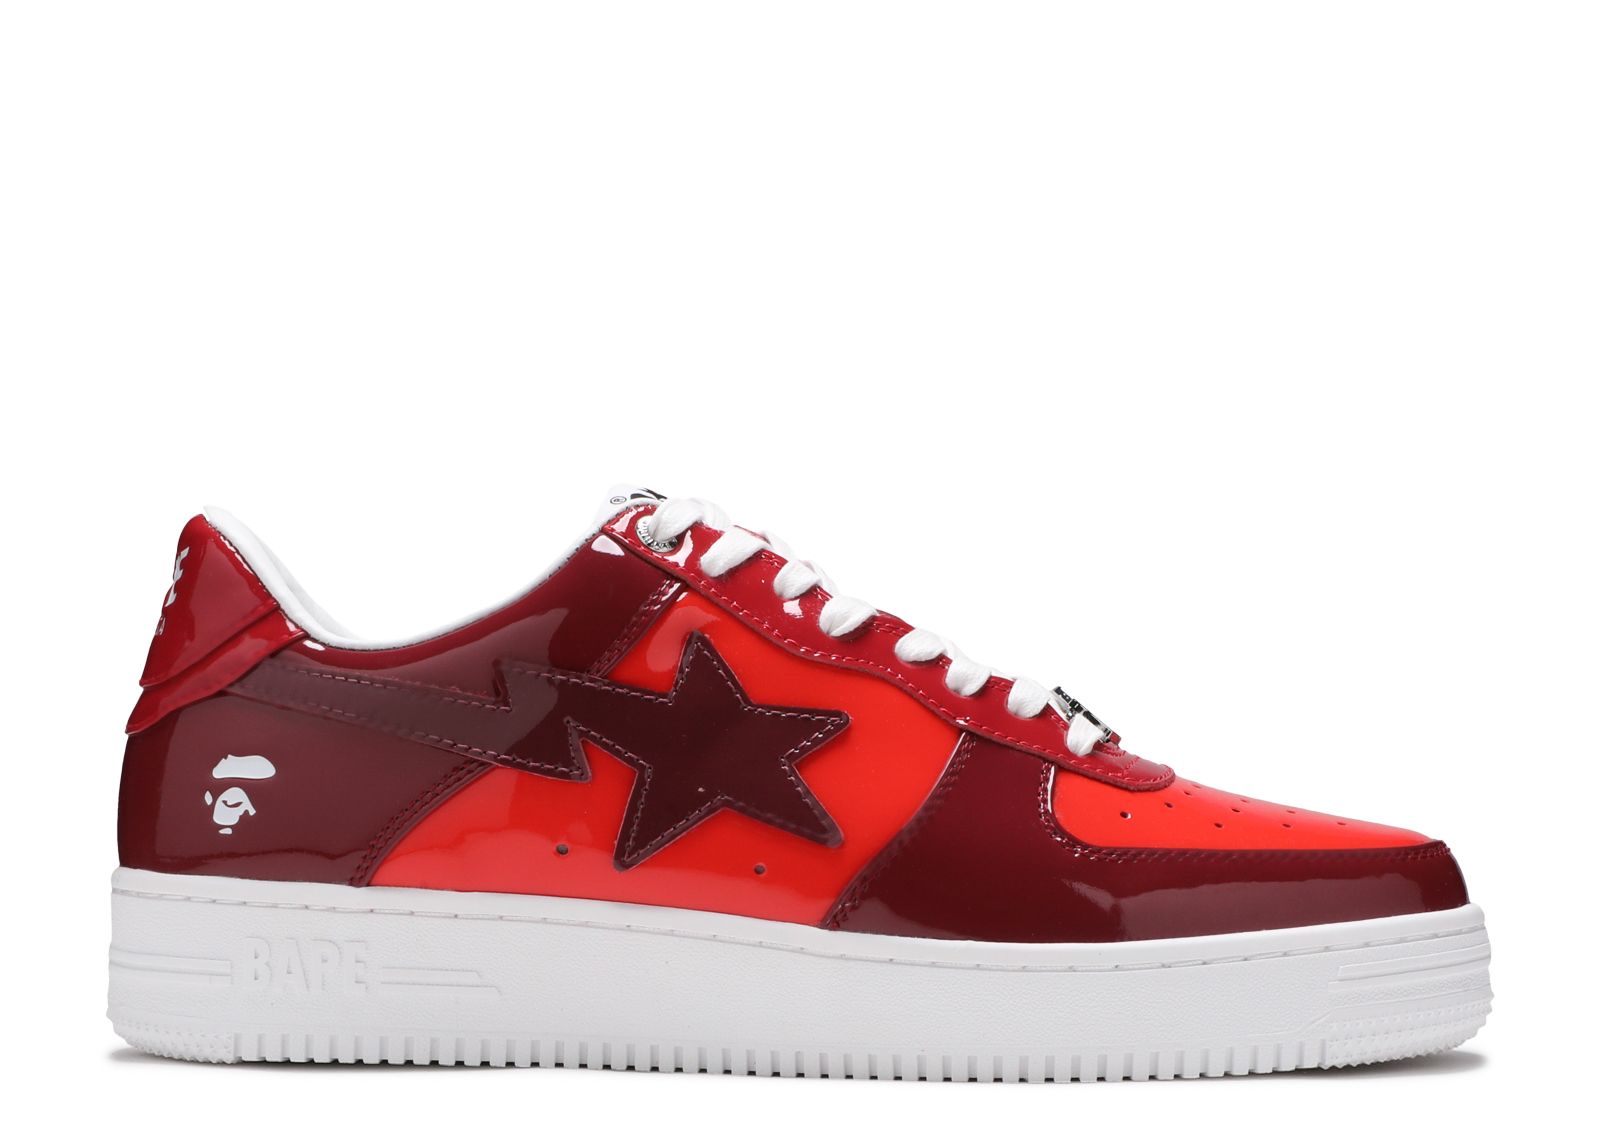 Bapesta Low M1 'Color Camo Combo Red' - BAPE - 1H20191046 RED - red ...